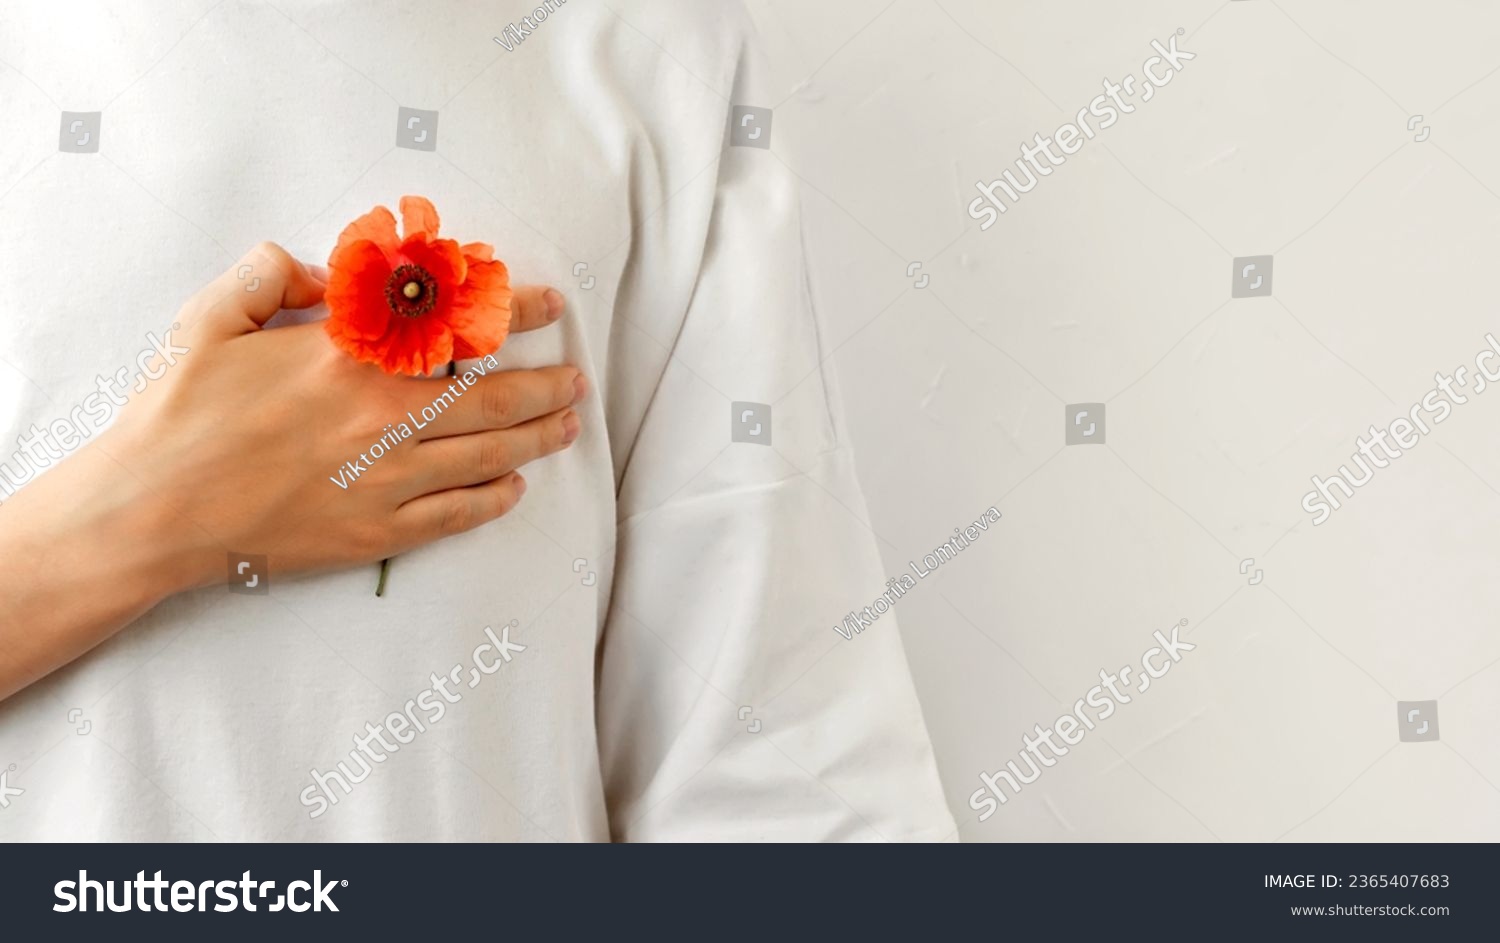 Hand on chest with red poppy flower on neutral white background. Military, Veterans day, remembrance and reconciliation concept. #2365407683